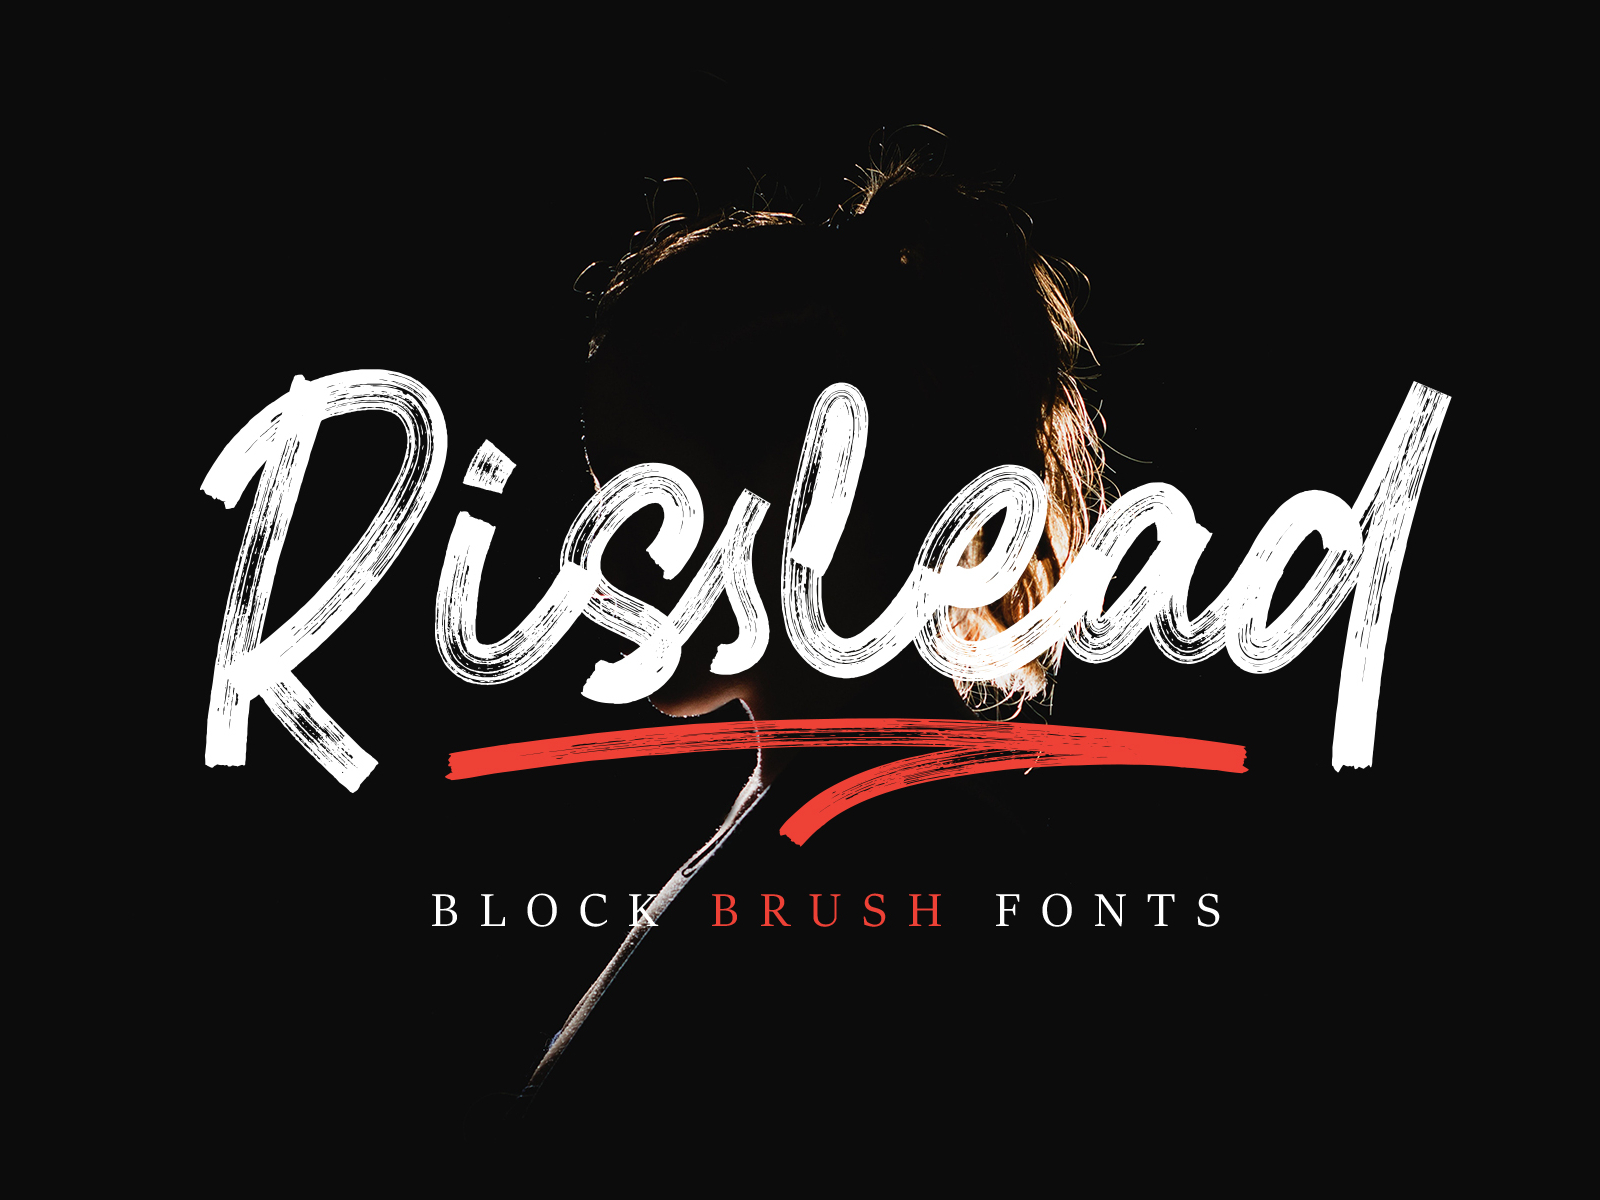 Download Free Risslead Block Brush Fonts By Stefie Justprince On Dribbble PSD Mockup Template